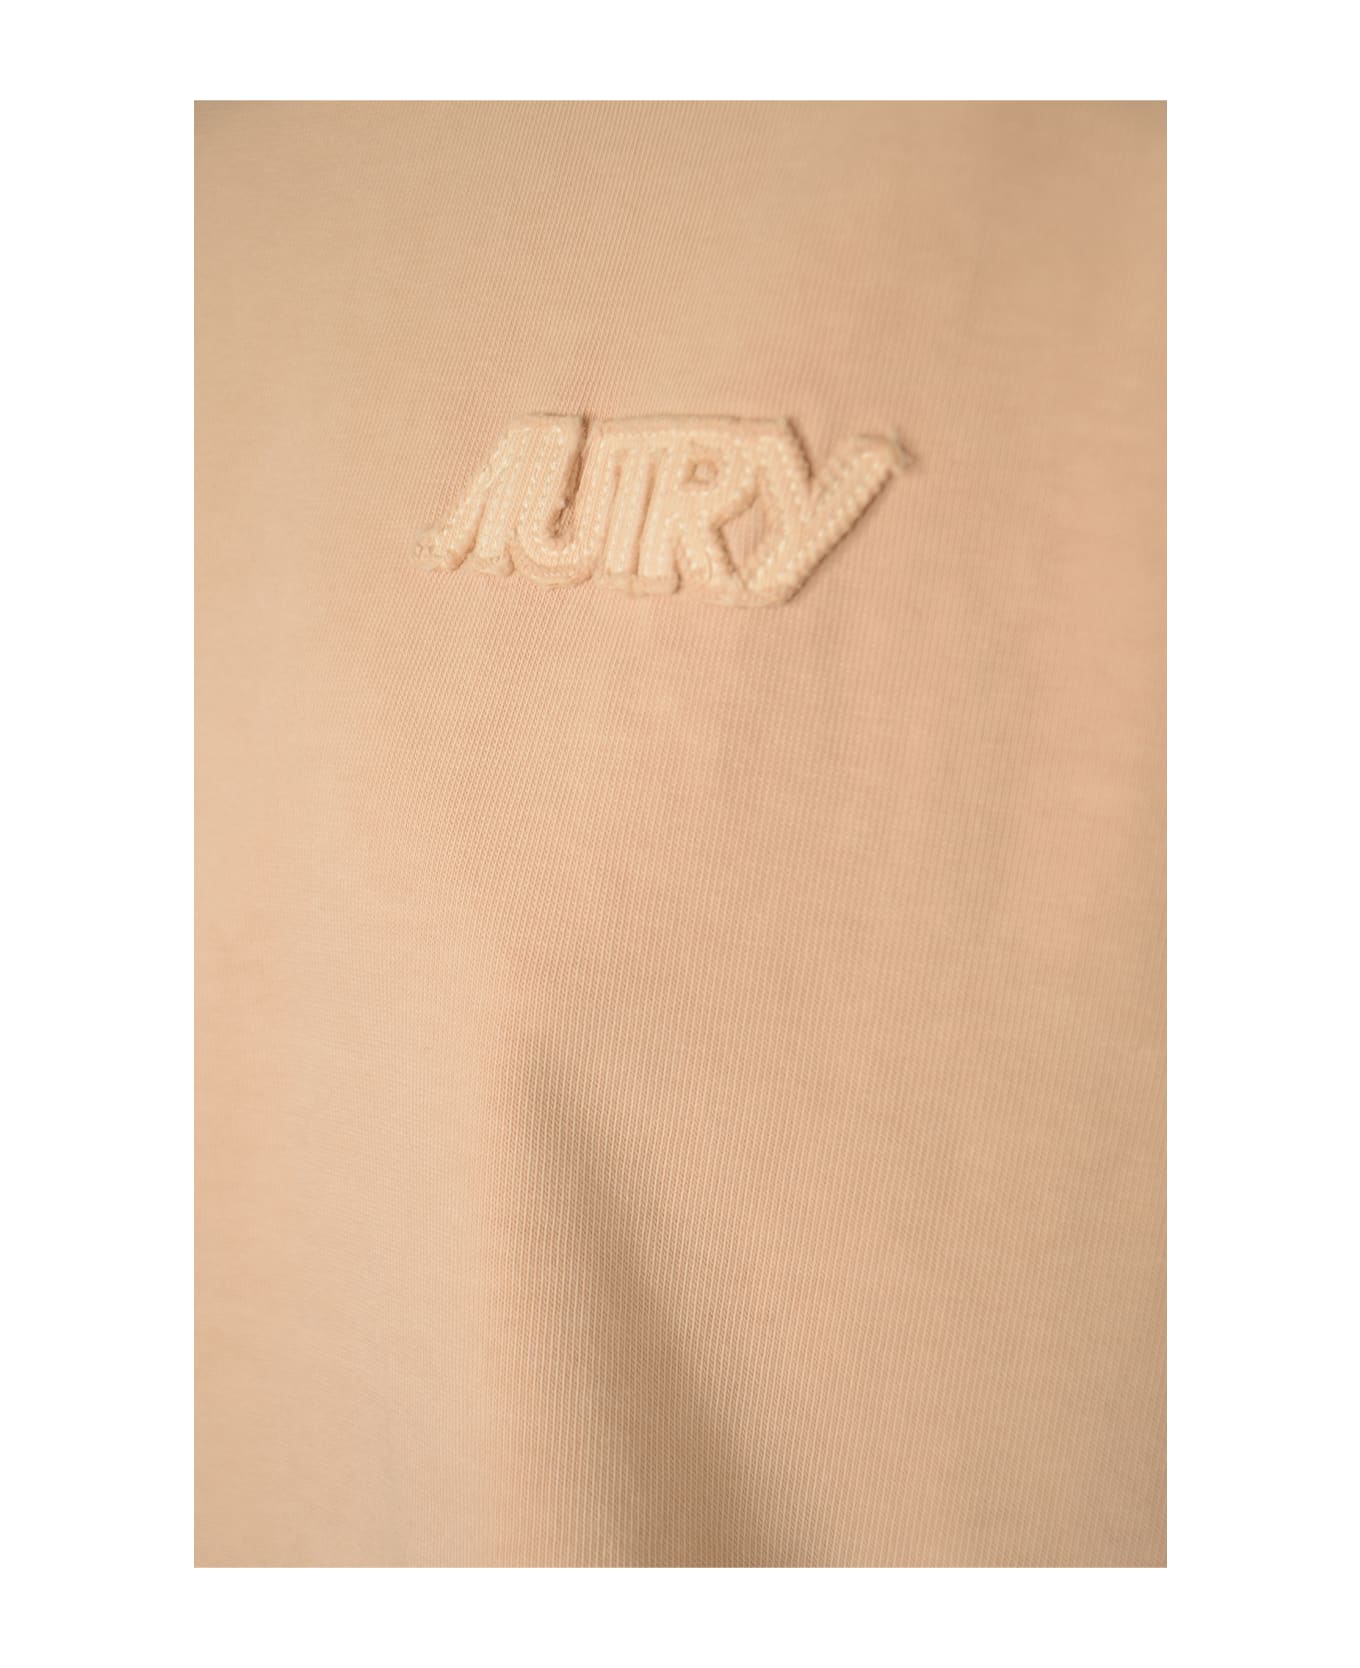 Autry Logo Embossed Crop T-shirt - Peony Rose